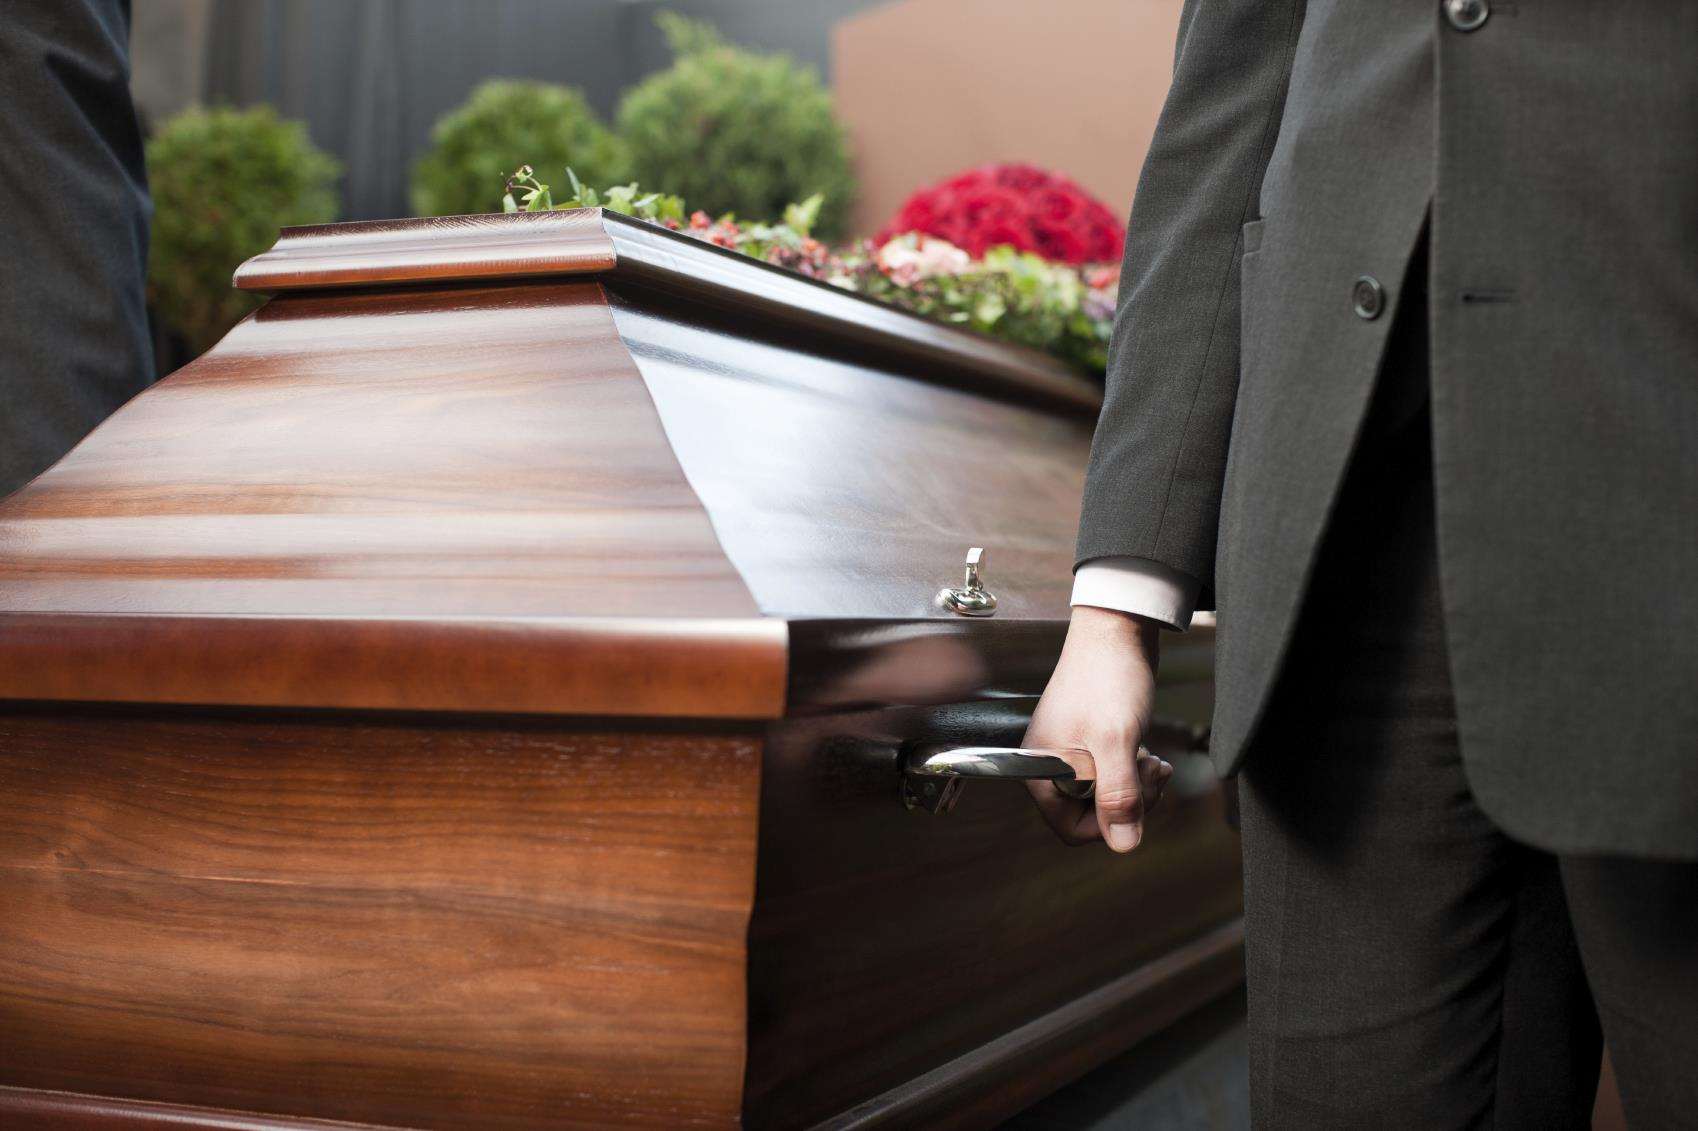 The husband stole his mother-in-law's body from the funeral director's. Stock image